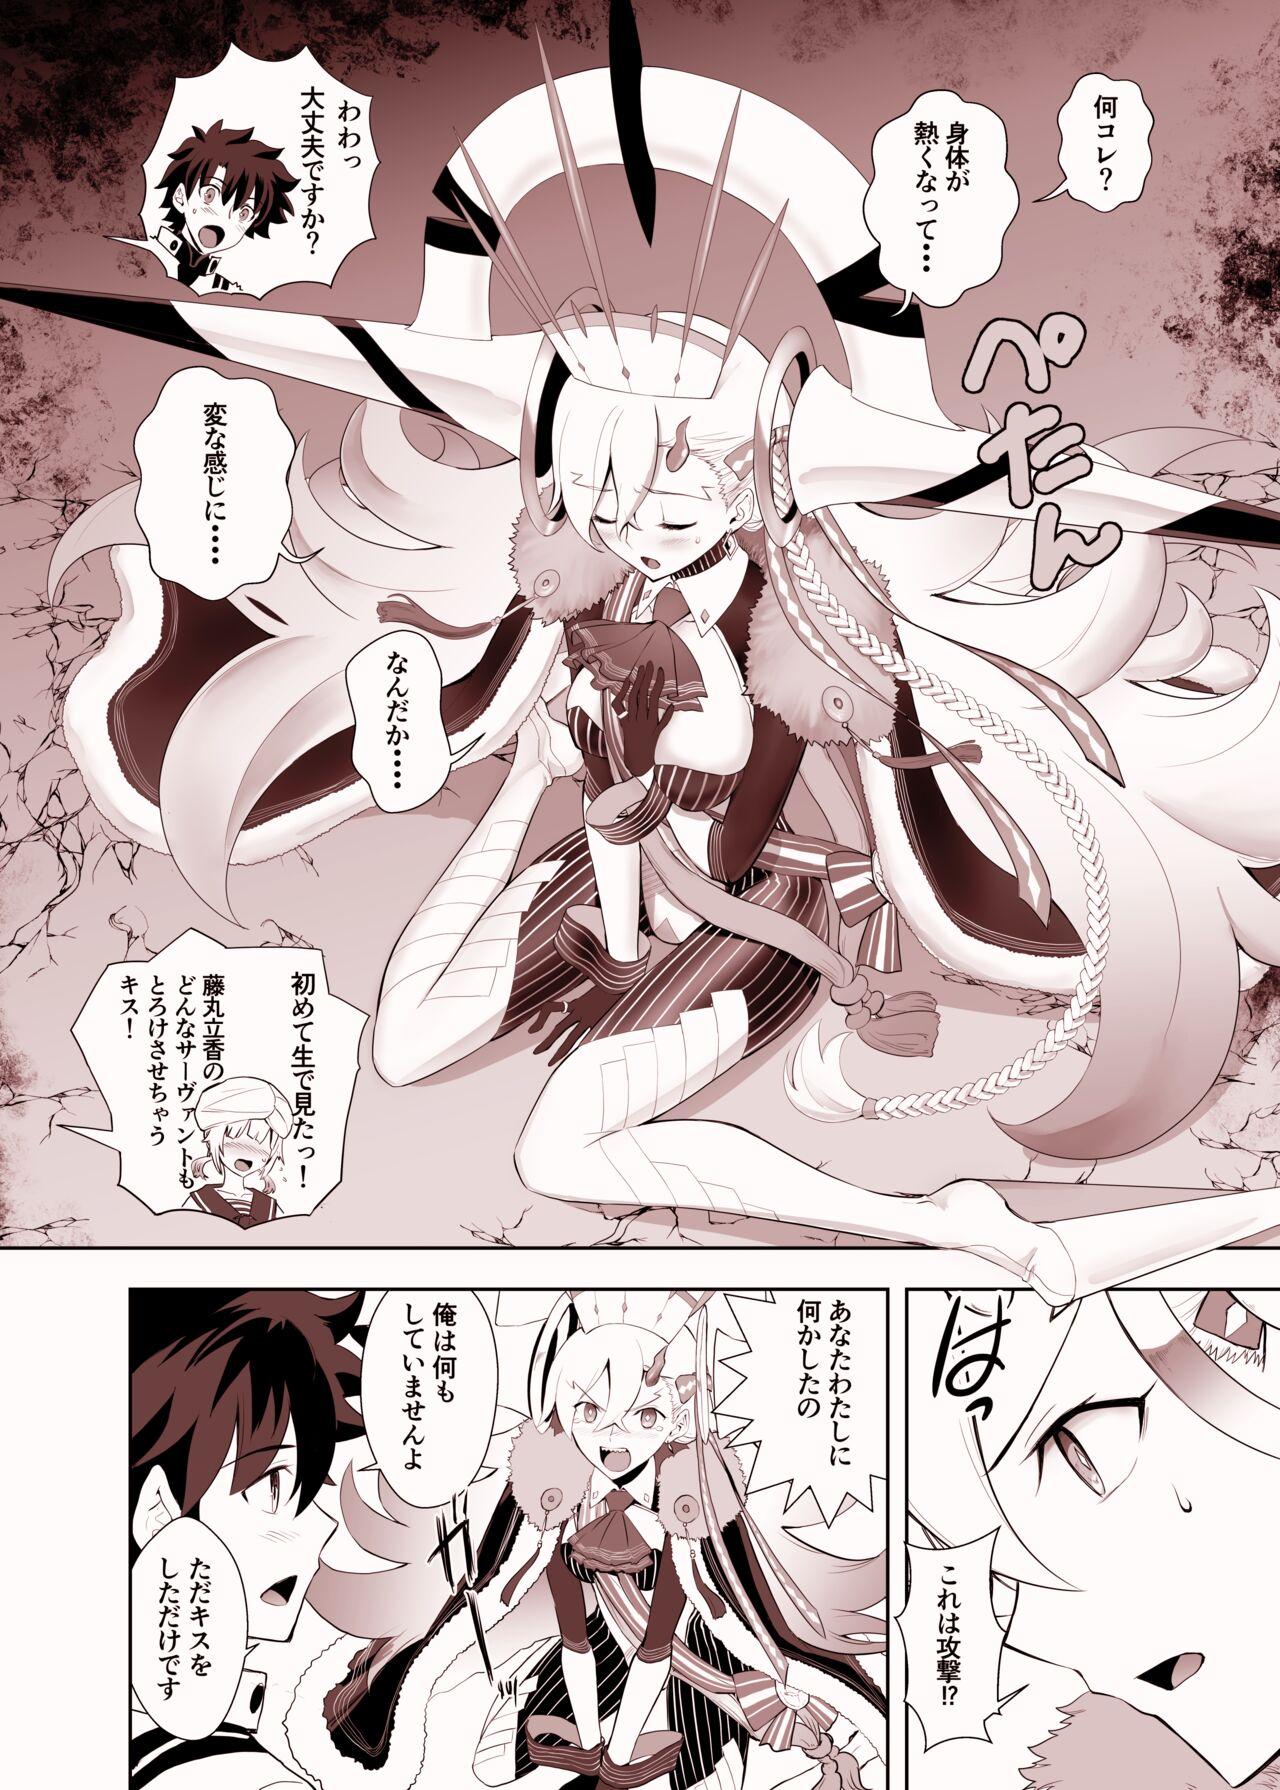 Bound Lovely U - Fate grand order Fleshlight - Page 6